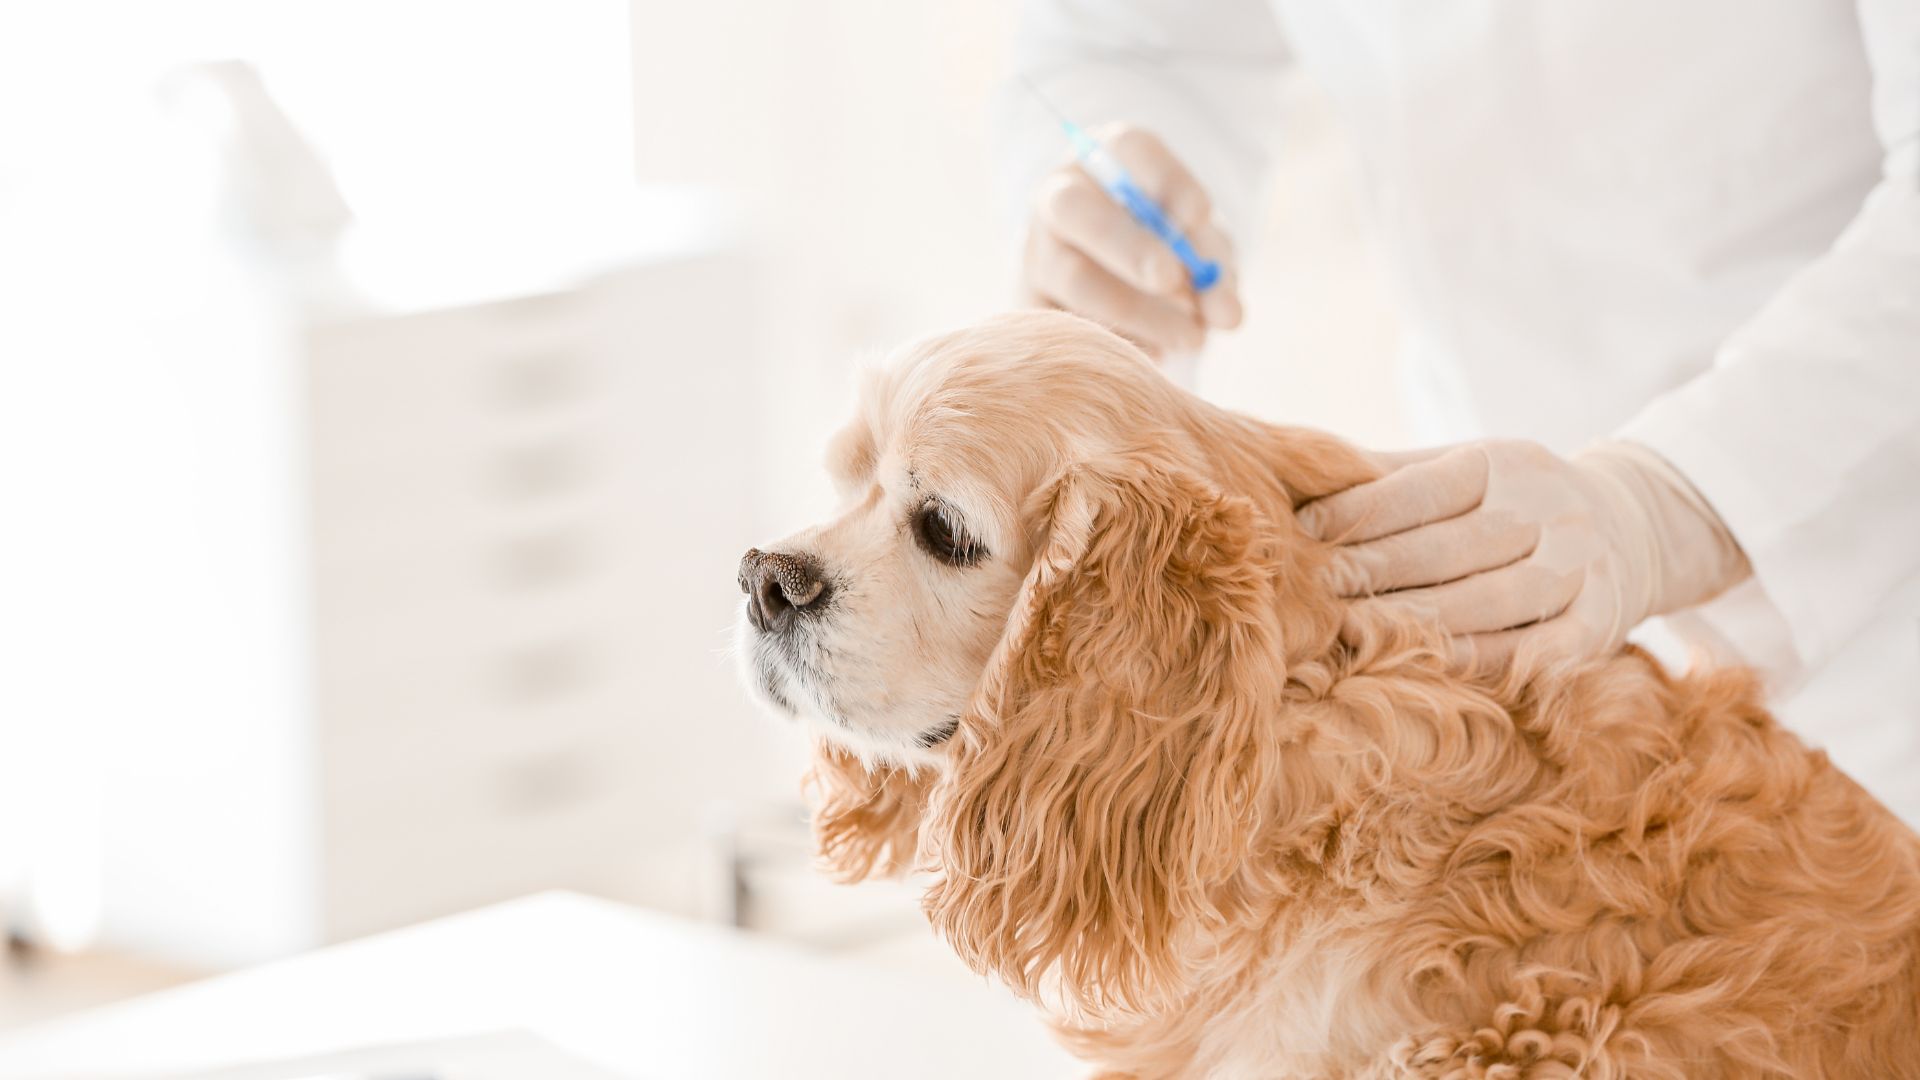 a dog being vaccinated by a person